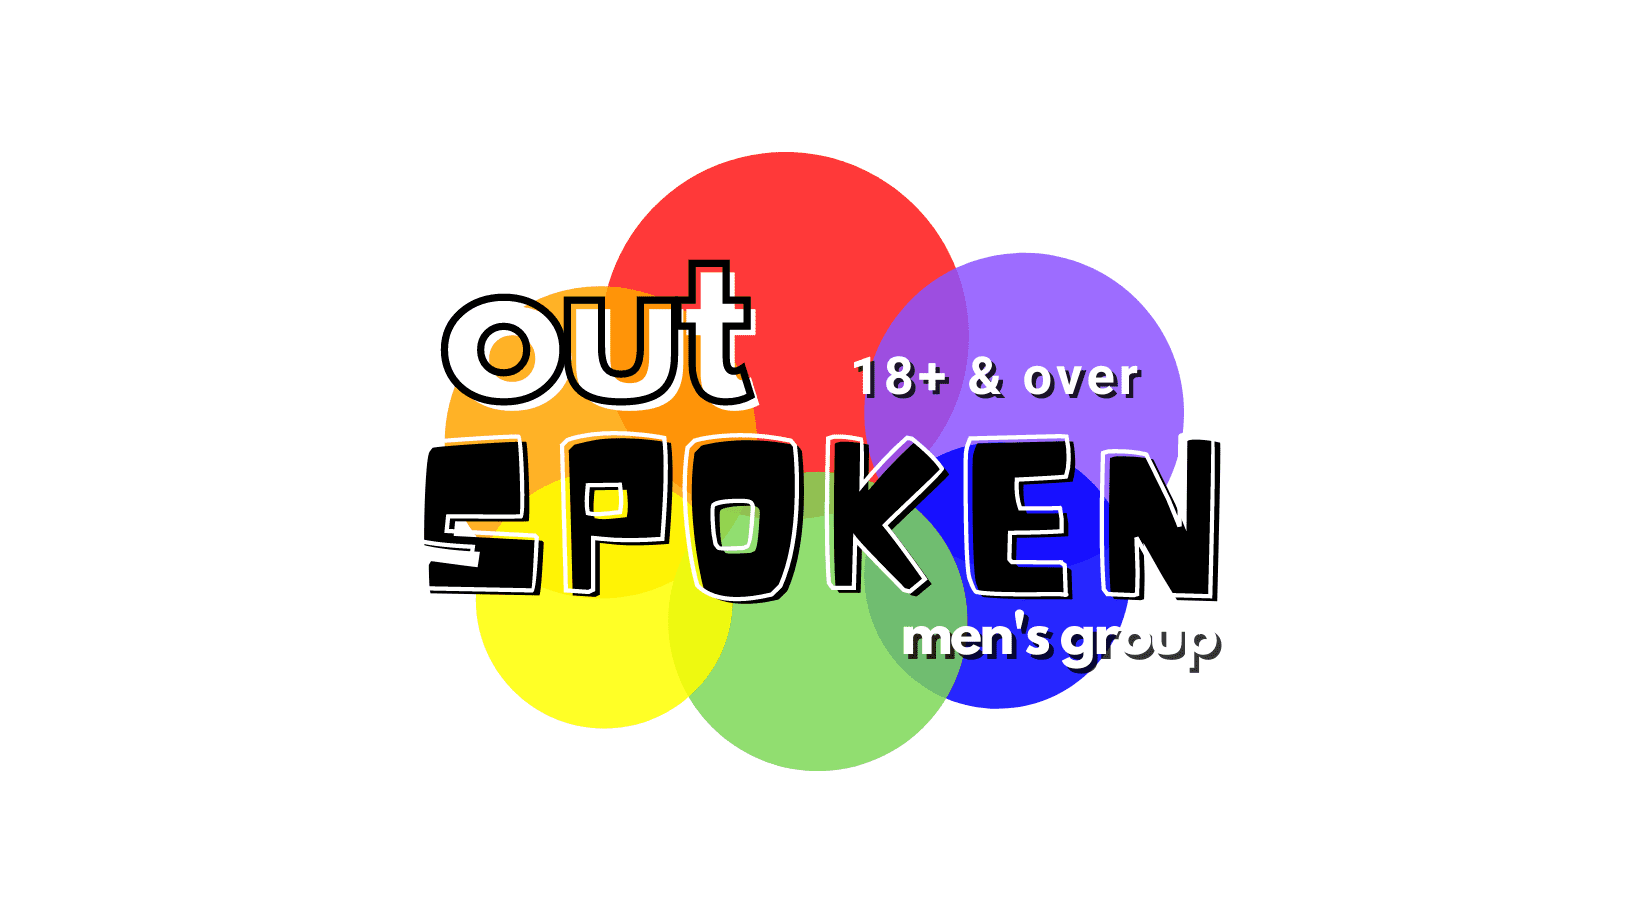 Logo of "outspoken men's group" with text overlaying multicolored circles.